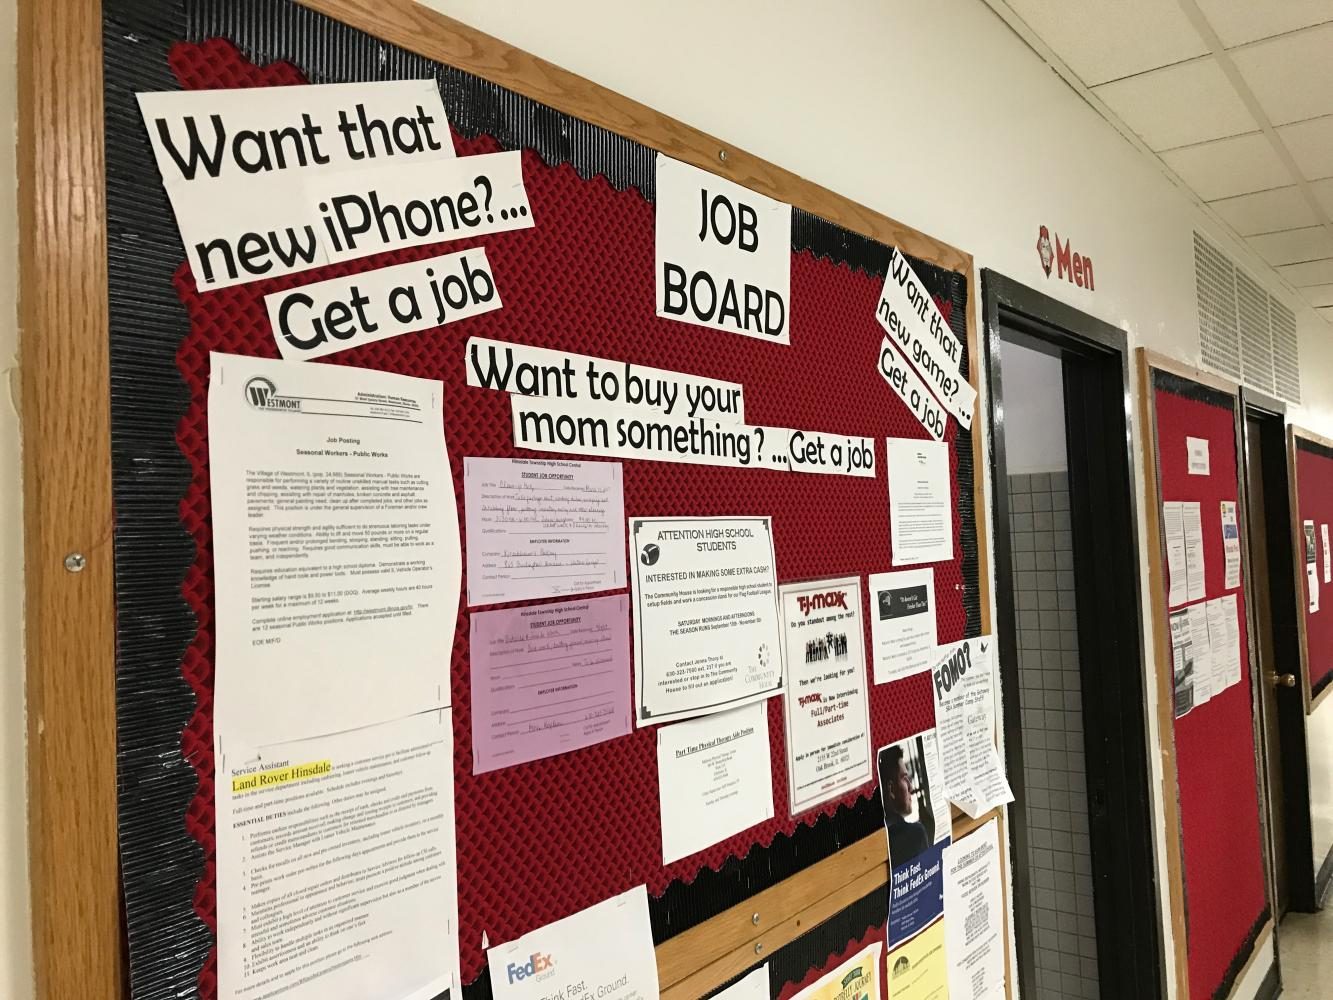 The job board across from the Guidance Department is always full of opportunities from eager employers.